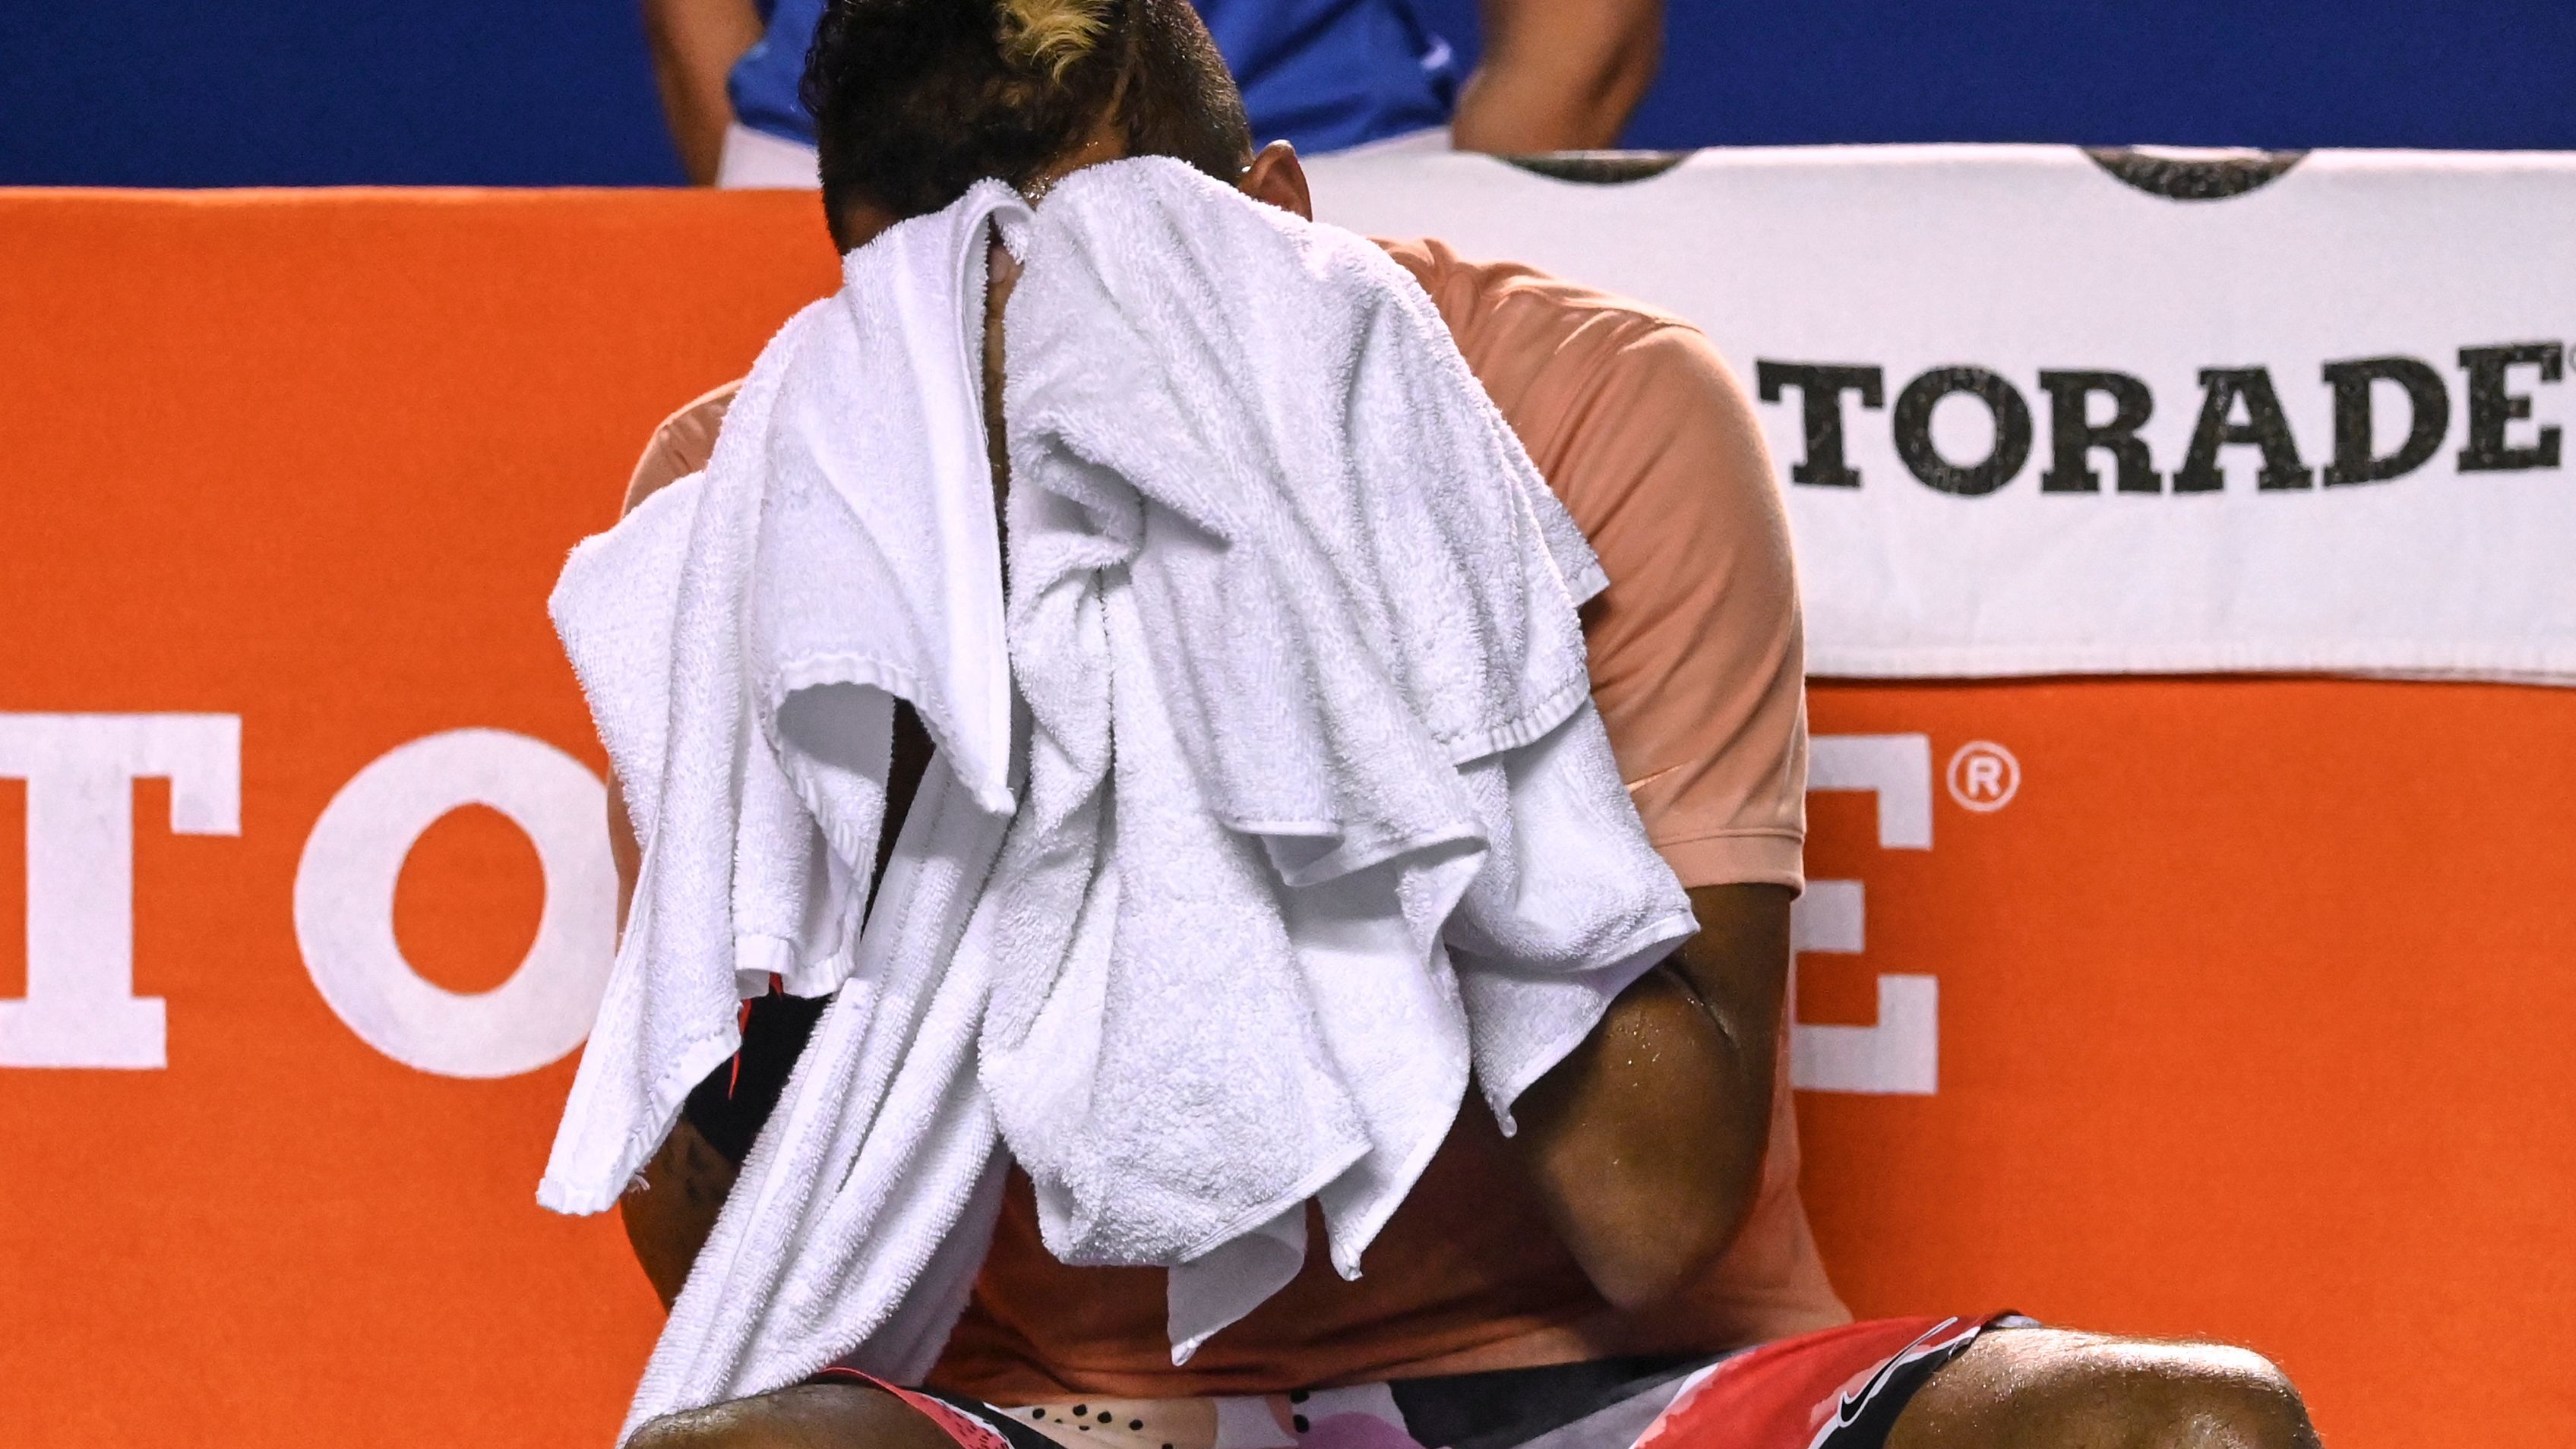 Nick Kyrgios wipes his face before withdrawing from his Mexican Open.